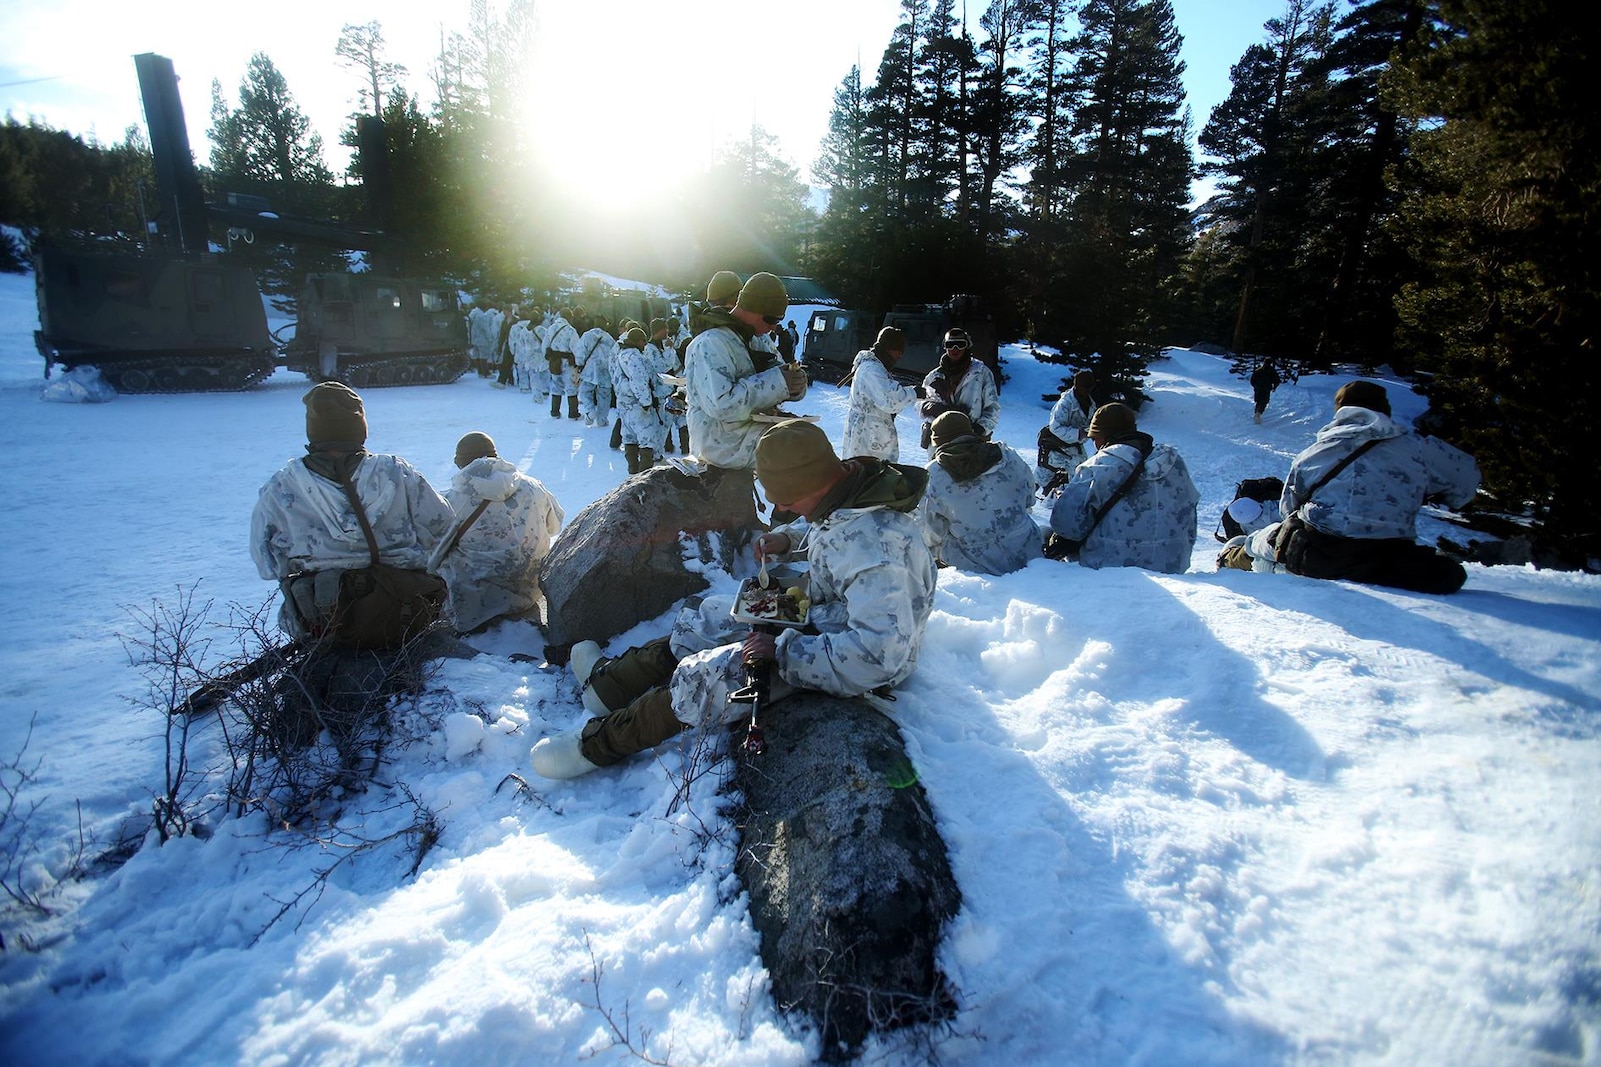 Marines eat warm food during a cold weather training exercise at the Mountain Warfare Training Center in Bridgeport, Calif., March 16, 2016. The Marines, combat engineers with 7th Engineer Support Battalion, 1st Marine Logistics Group, were among 90 Marines with 7th ESB who served as the logistics combat element in support of 2nd Battalion, 4th Marine Regiment, 1st Marine Division, during Mountain Exercise 6-16, Feb. 24- March 26, 2016. The Battalion integrated 18 combat engineers with the infantrymen conducting the exercise. (U.S. Marine Corps photo by Sgt. Laura Gauna/released)